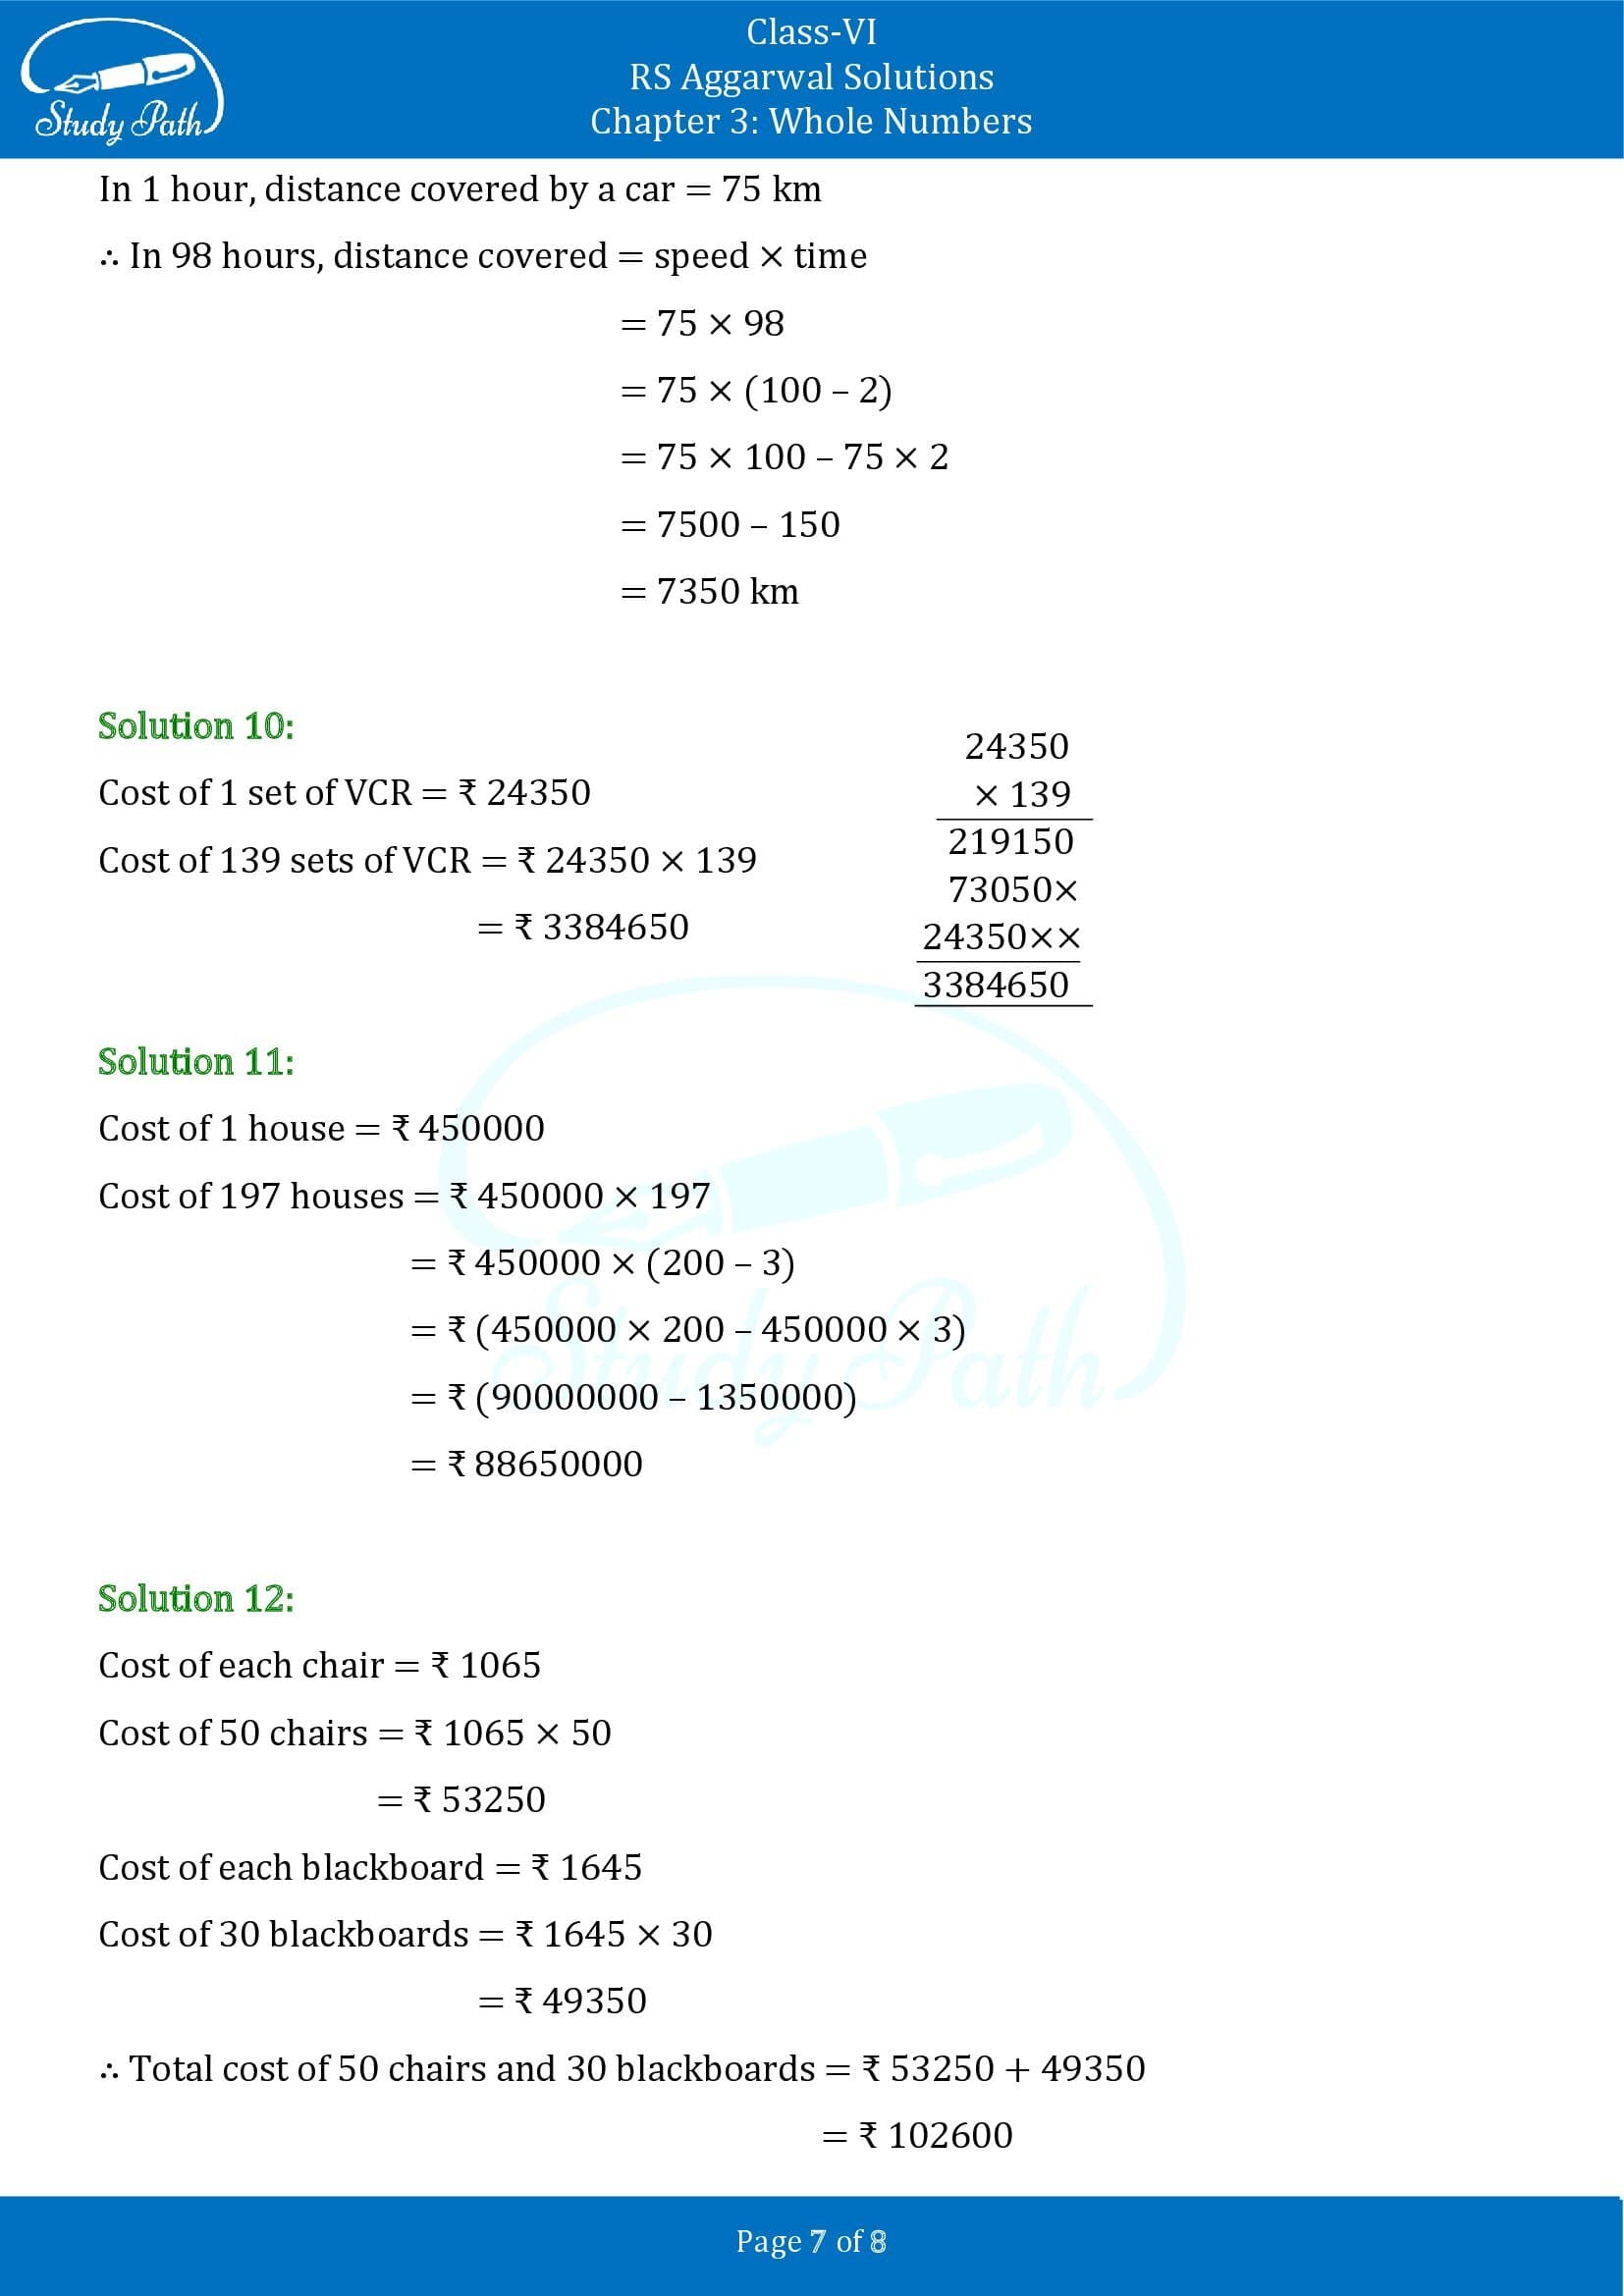 RS Aggarwal Solutions Class 6 Chapter 3 Whole Numbers Exercise 3D 0007